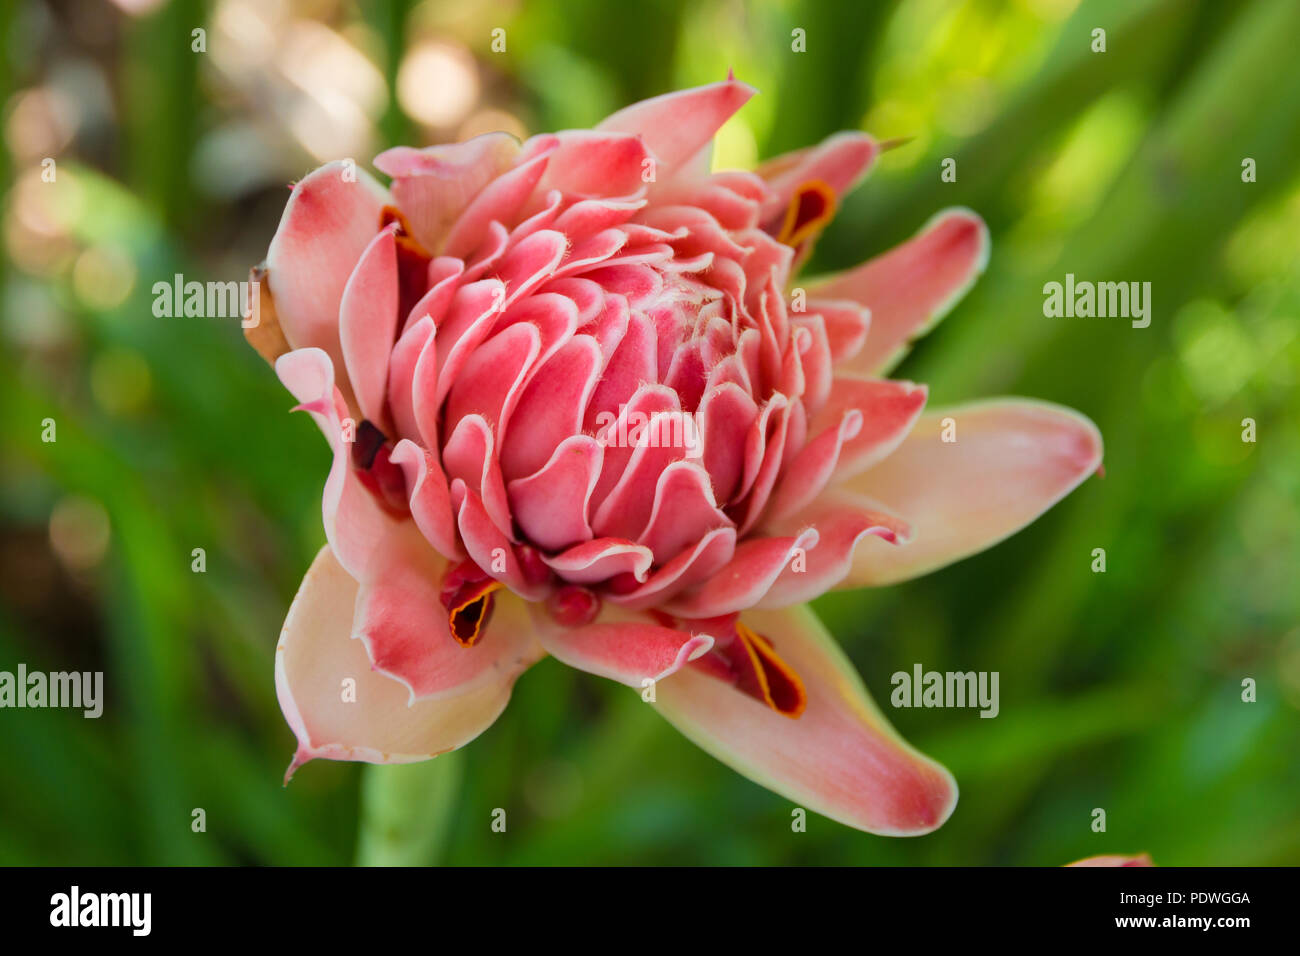 Great close up shot of a beautiful pink torch ginger flower (Etlingera elatior) blossom. This special flower is used as decoration in flower... Stock Photo